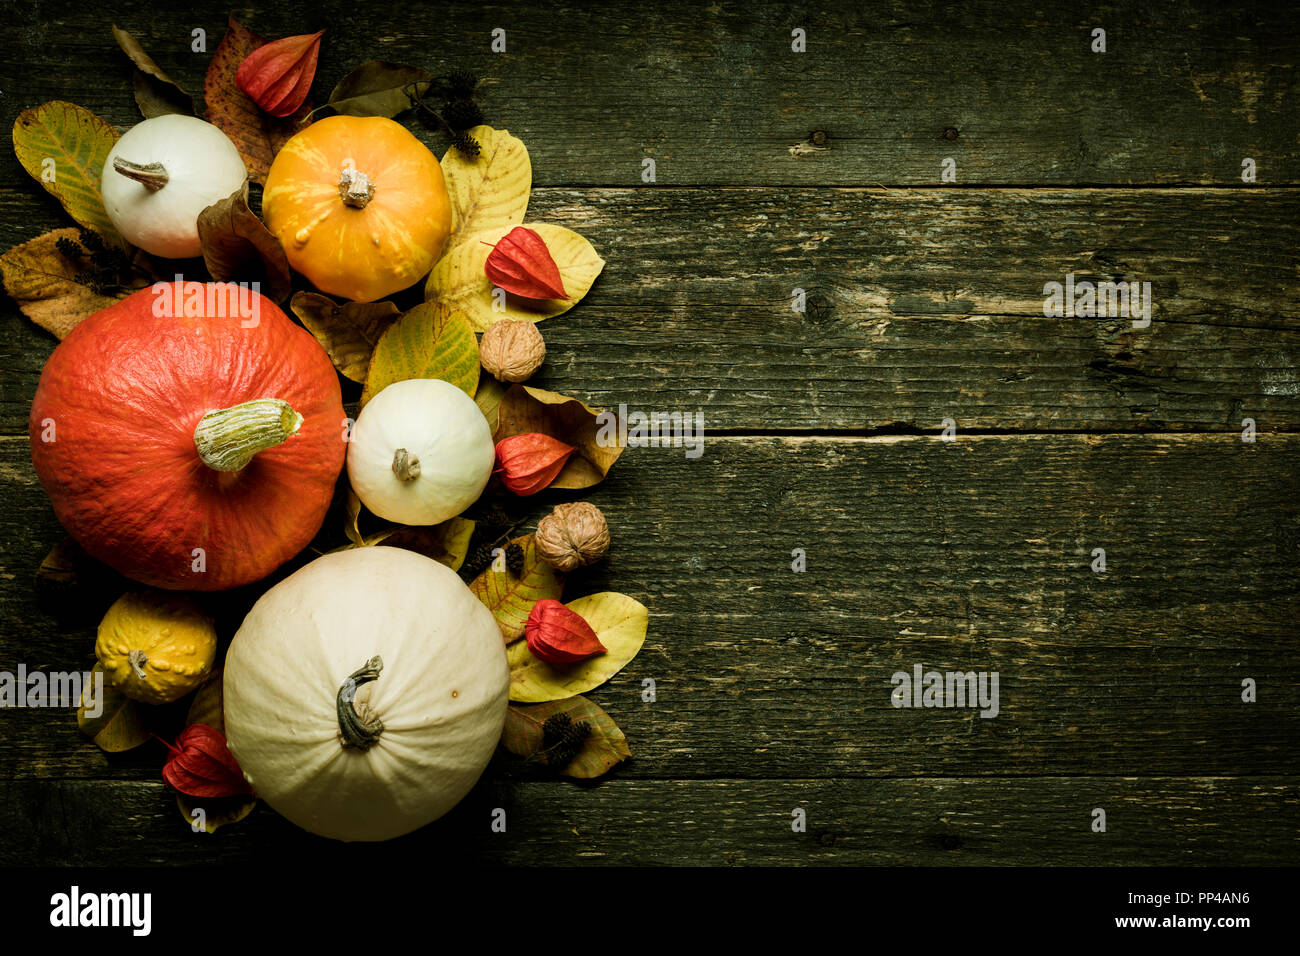 Autumn Harvest and Holiday still life. Happy Thanksgiving Background. Selection of various pumpkins on dark wooden background. Autumn vegetables and s Stock Photo